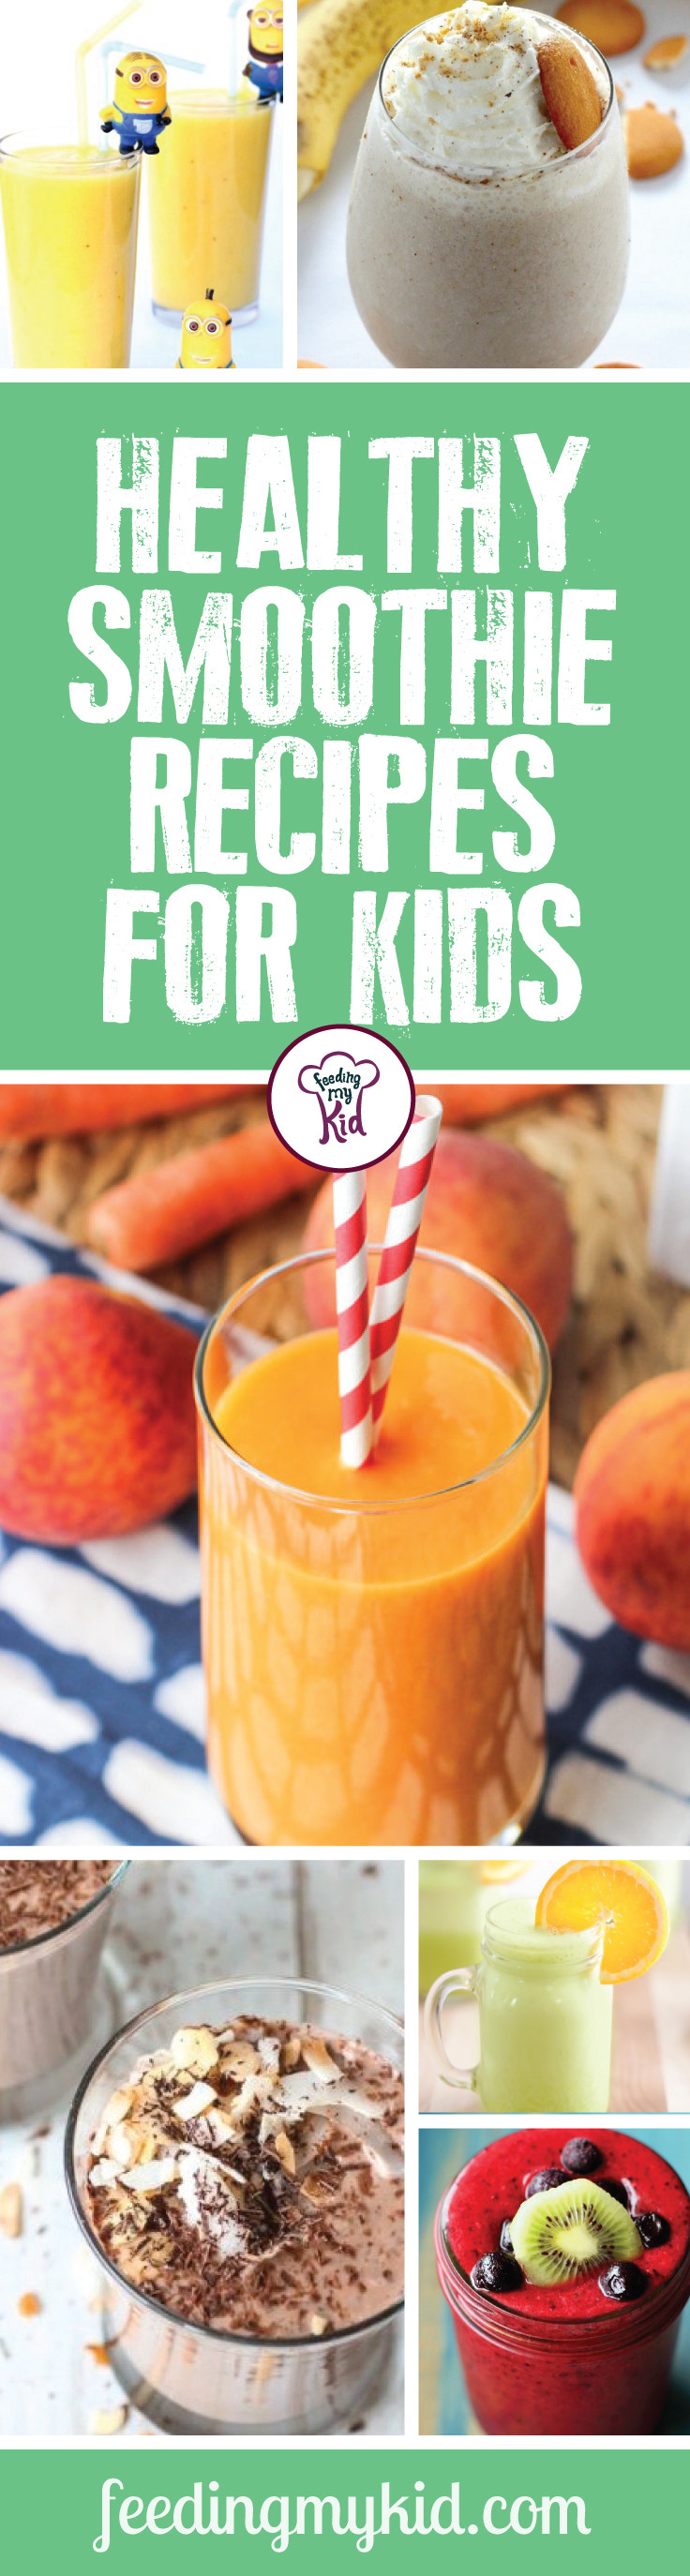 Healthy Smoothie Recipes For Kids
 Healthy Smoothie Recipes For Kids Feeding My Kid